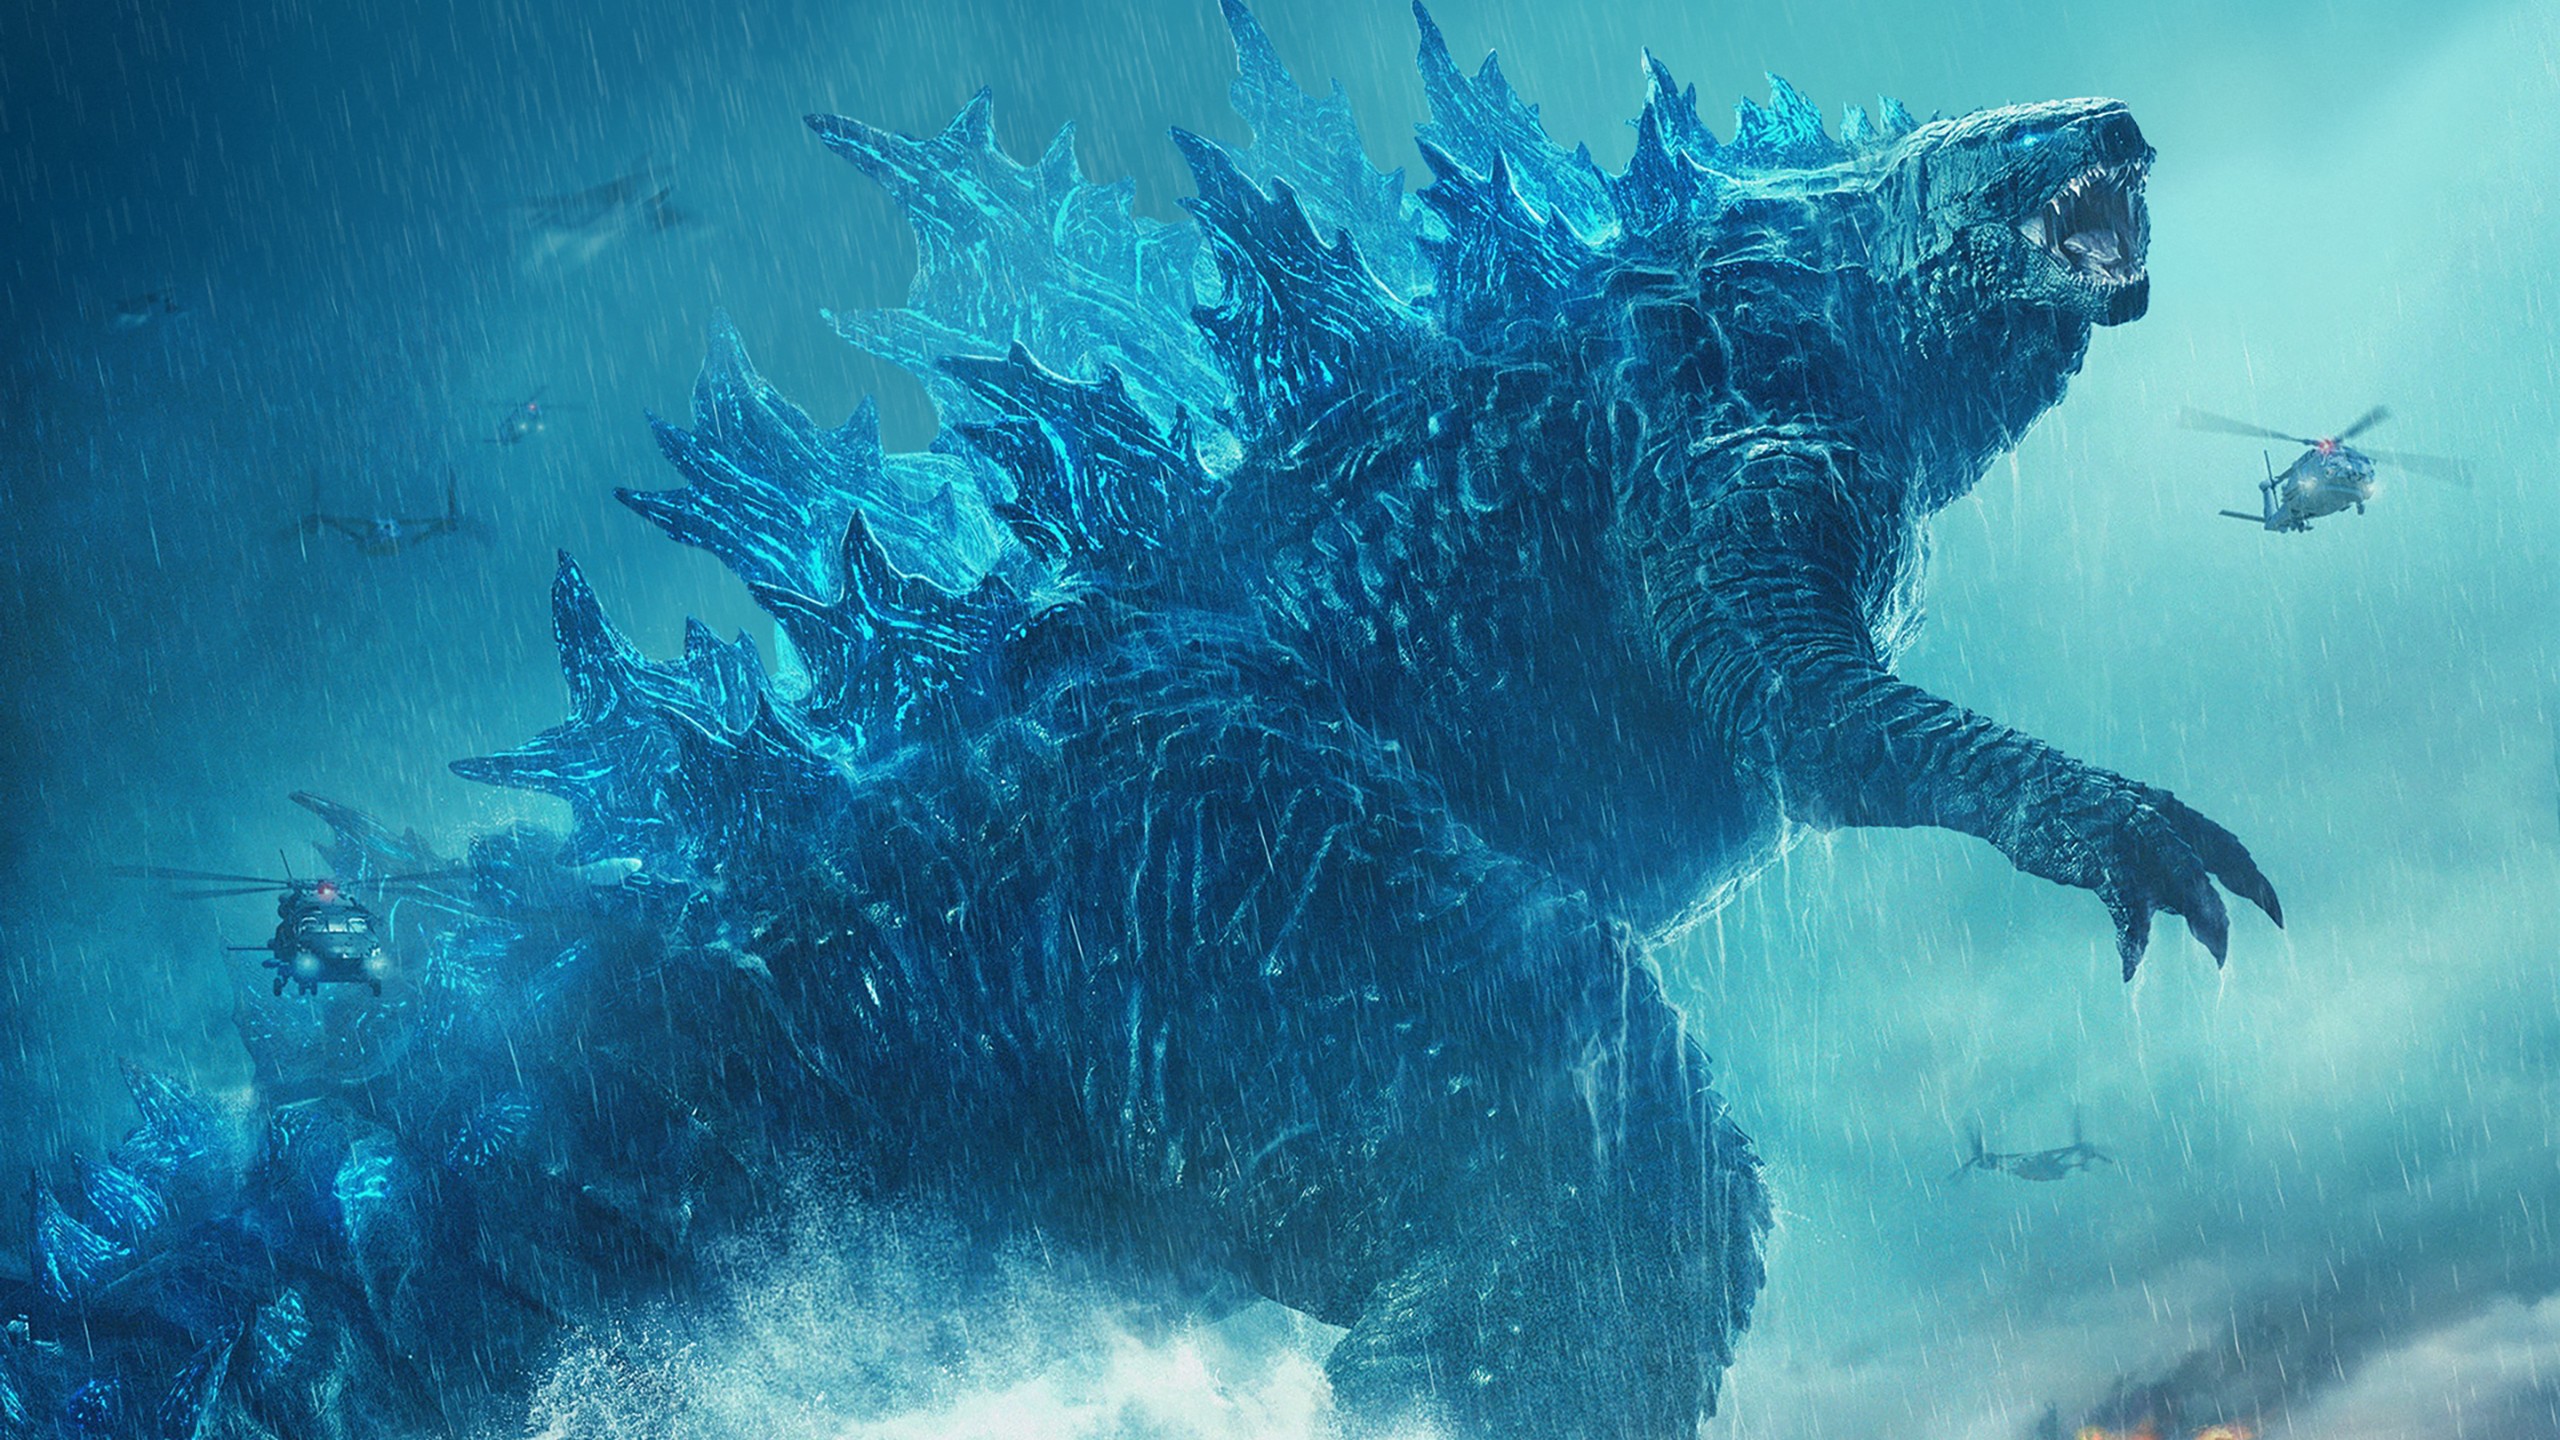 Godzilla King of the Monsters 2019 Wallpapers